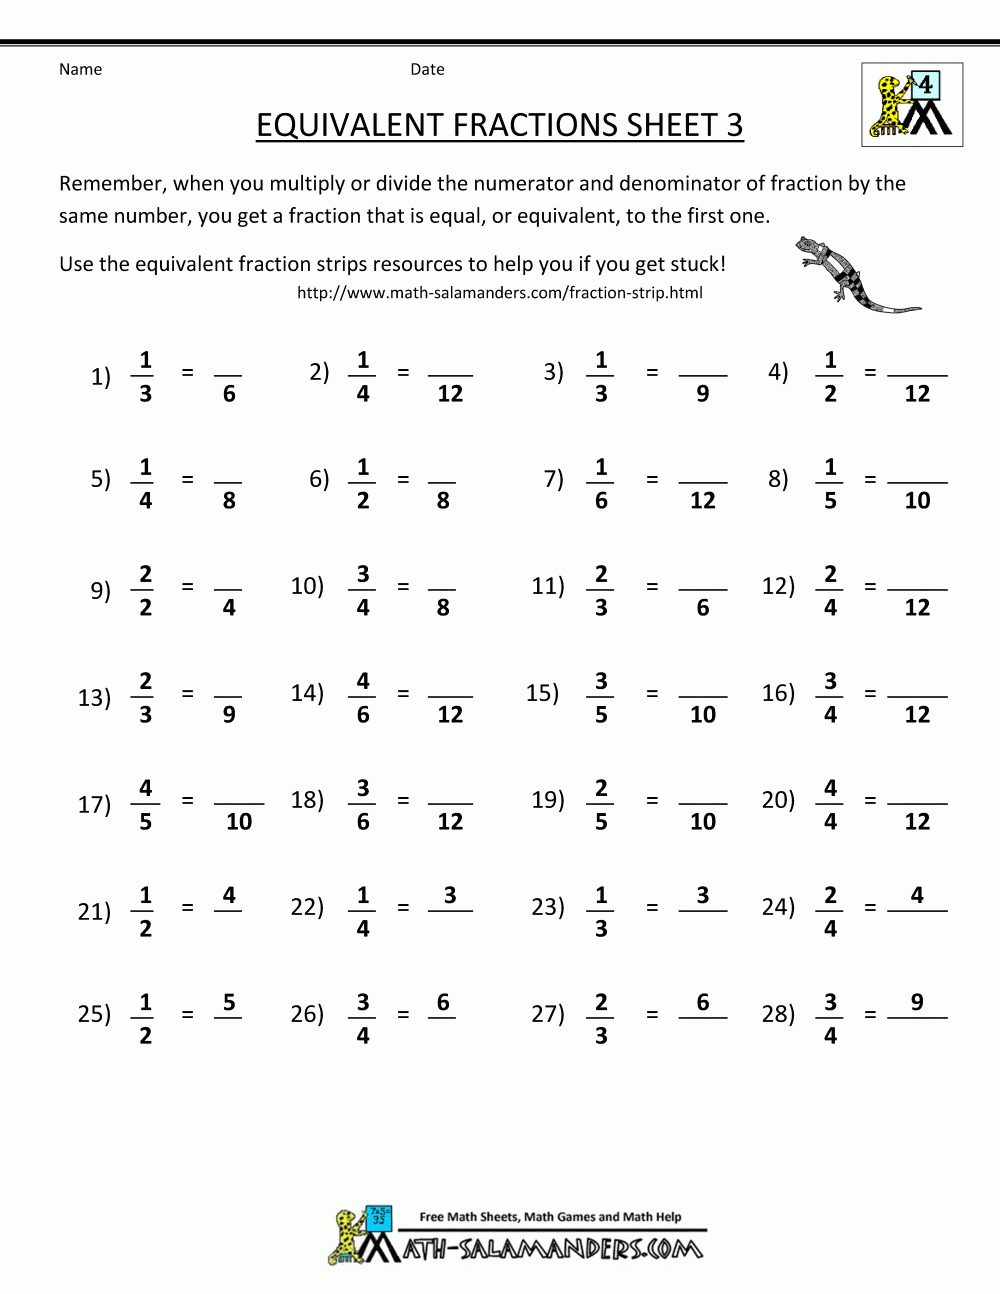 Free Fraction Sheets Equivalent Fractions 3 studentteaching 4Th Grade Equivalent Fractions